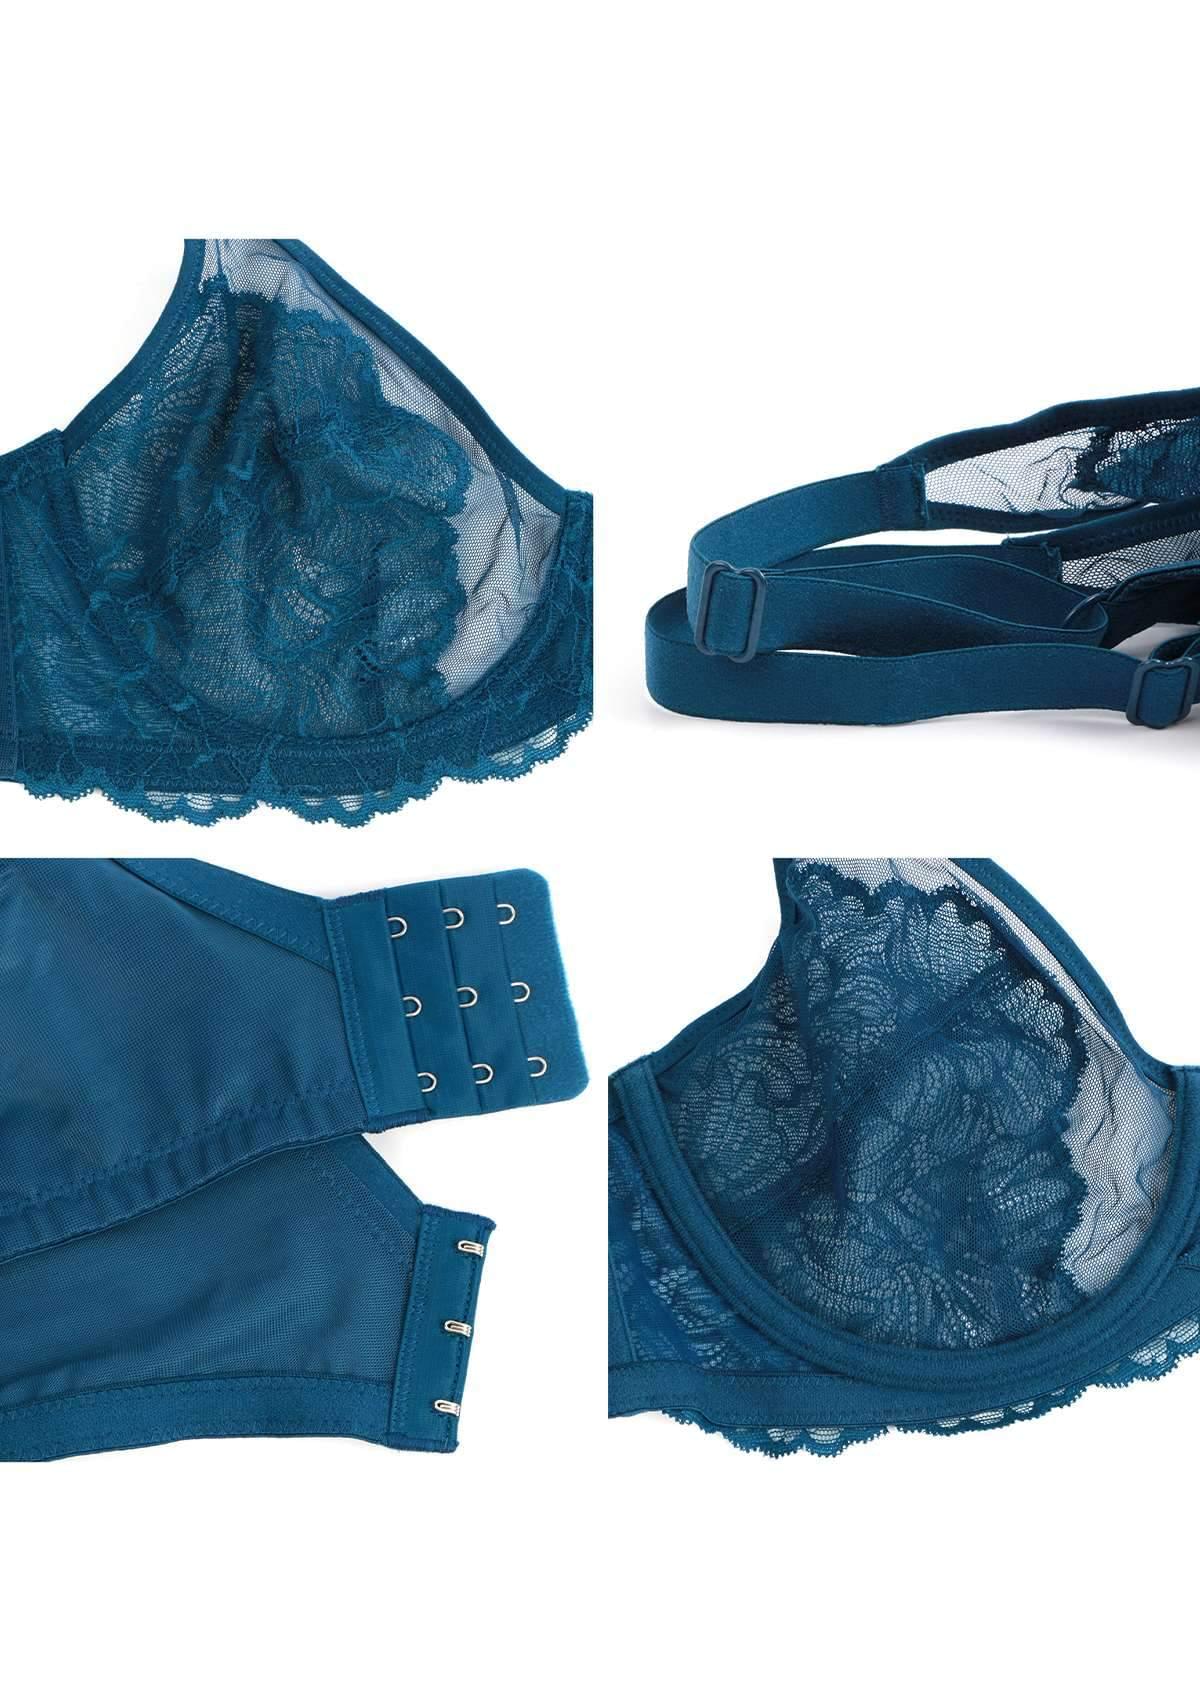 HSIA Blossom Lace Bra And Underwear Sets: Comfortable Plus Size Bra - Biscay Blue / 38 / D